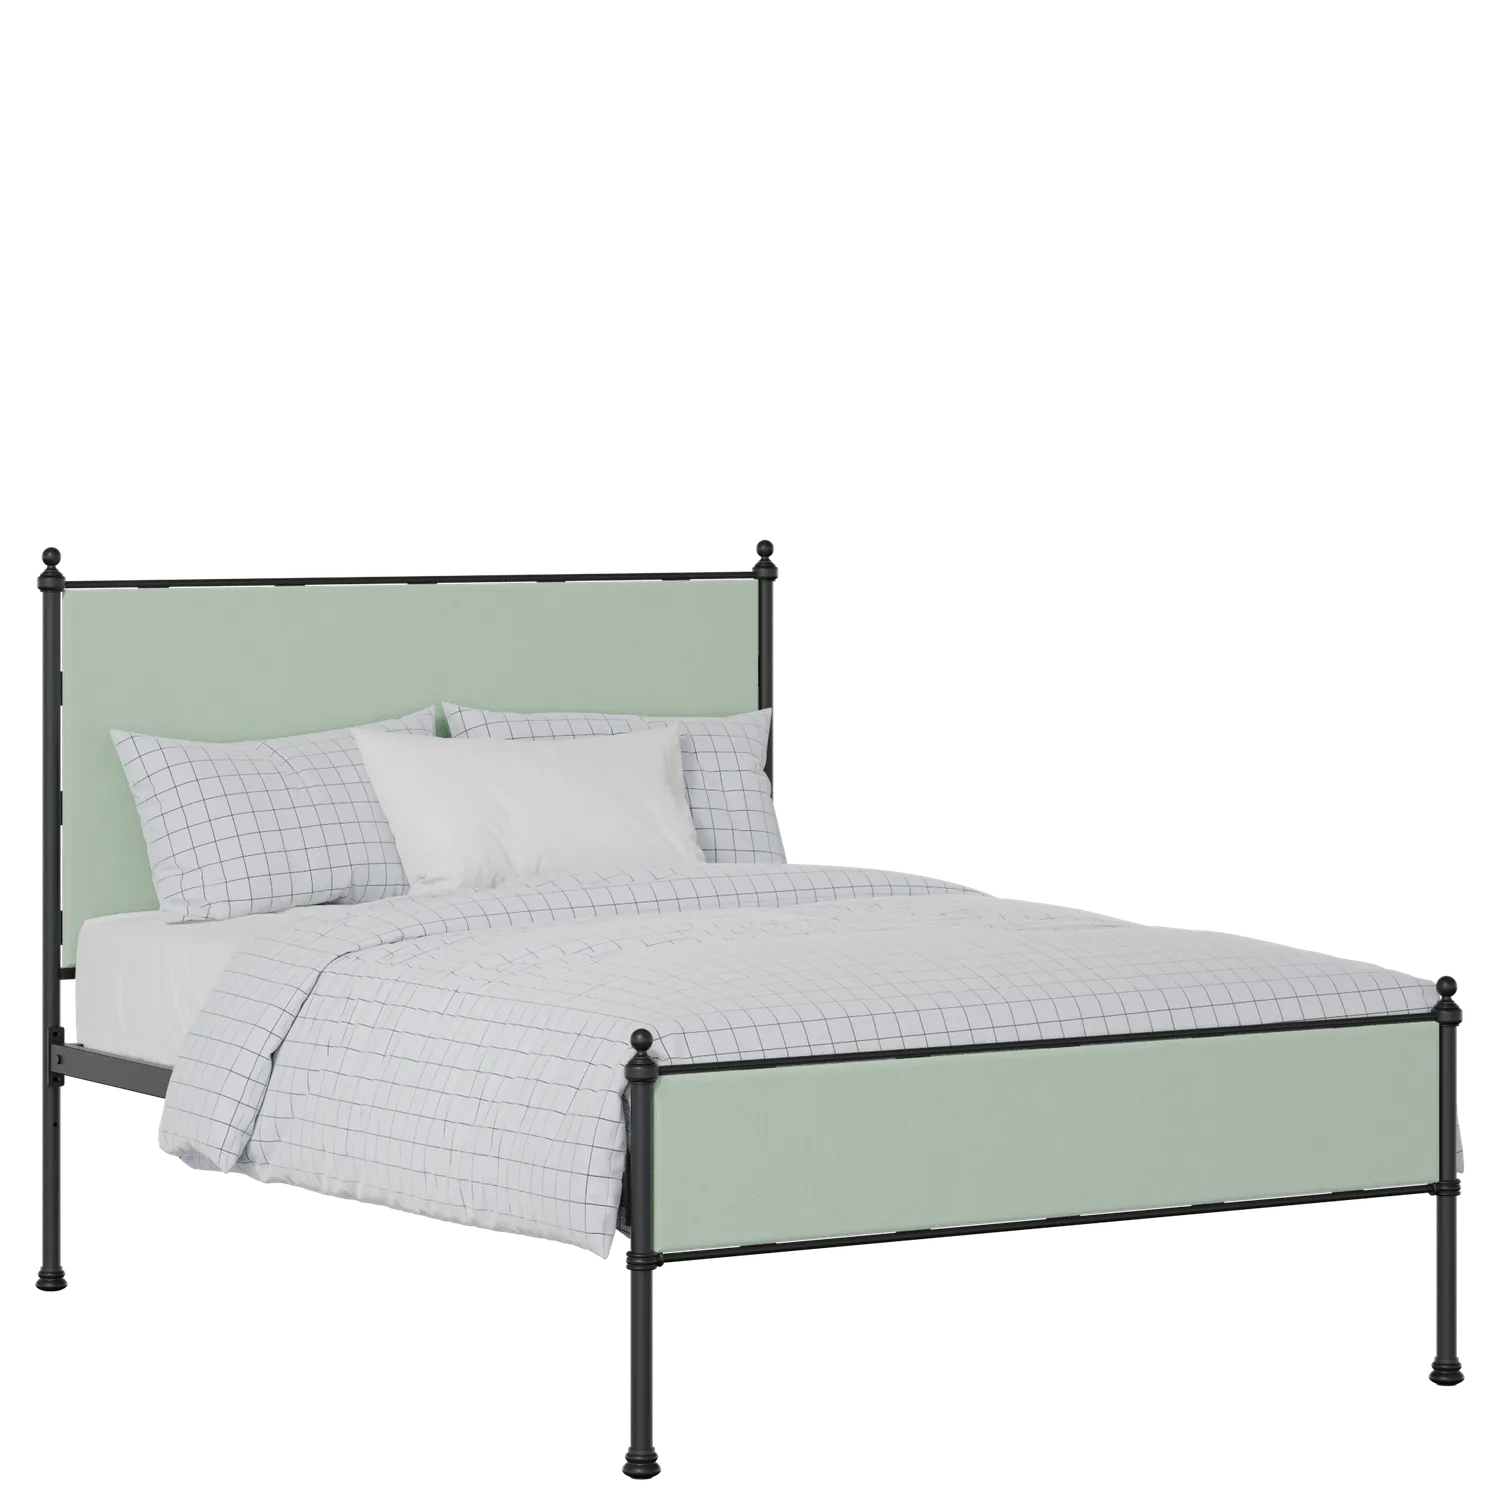 Neville Slim iron/metal upholstered bed in black with mineral fabric